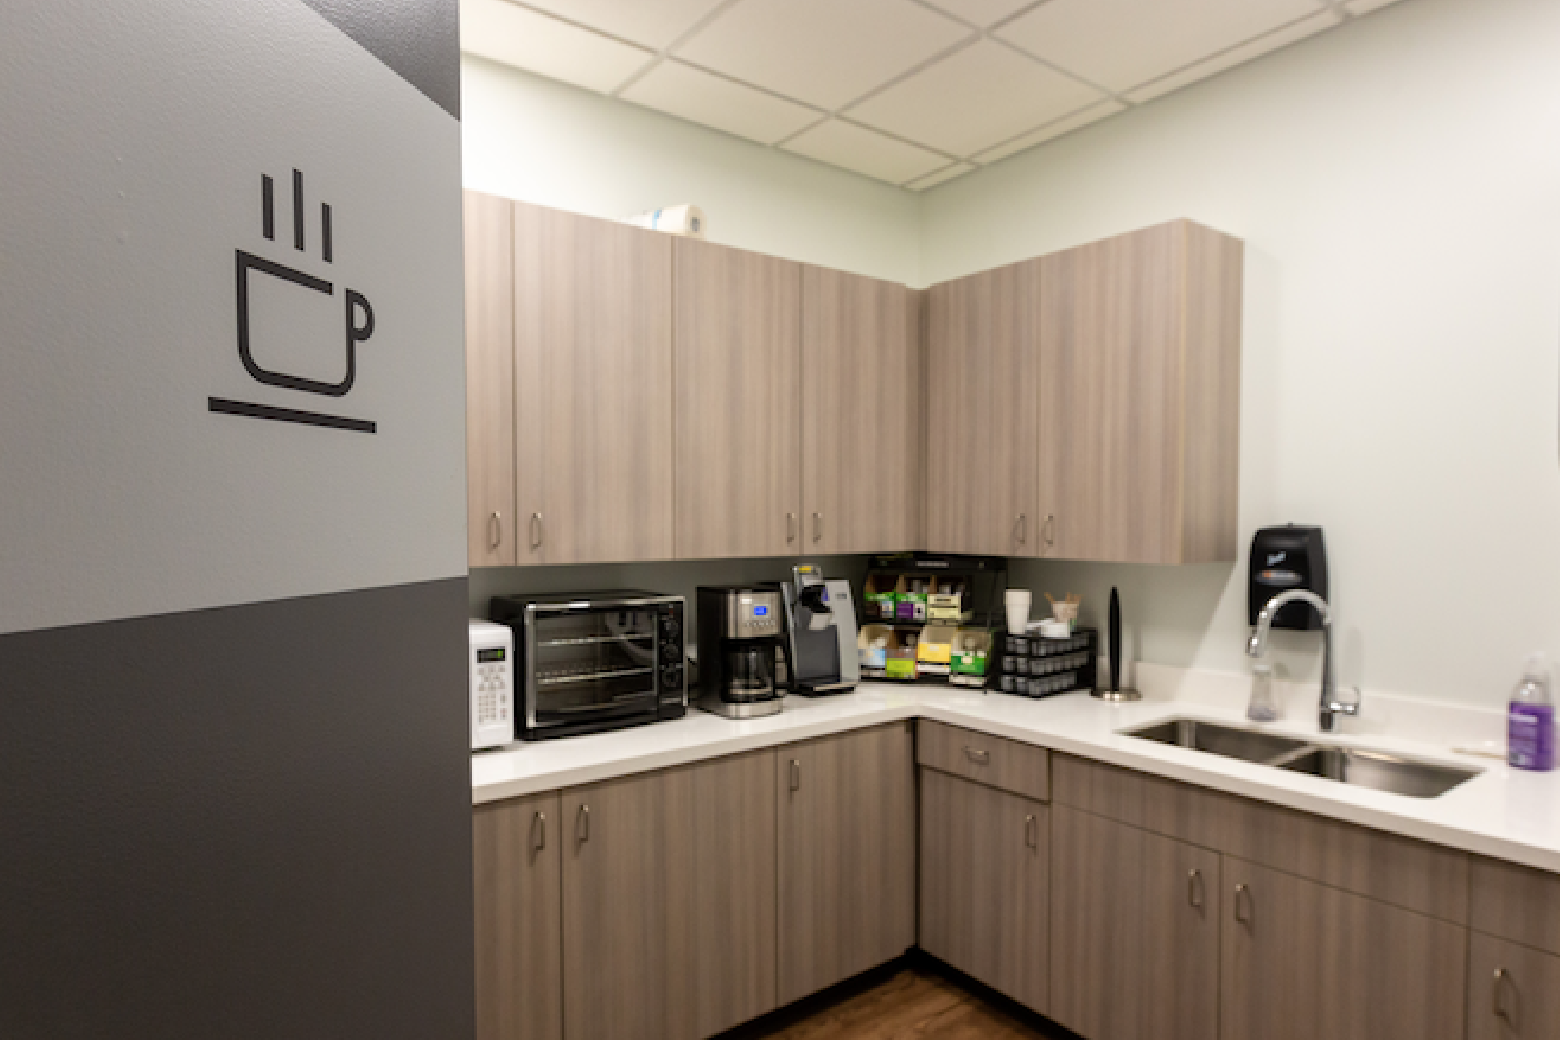 The kitchenette for studio crews at (add)ventures EPIC HQ.